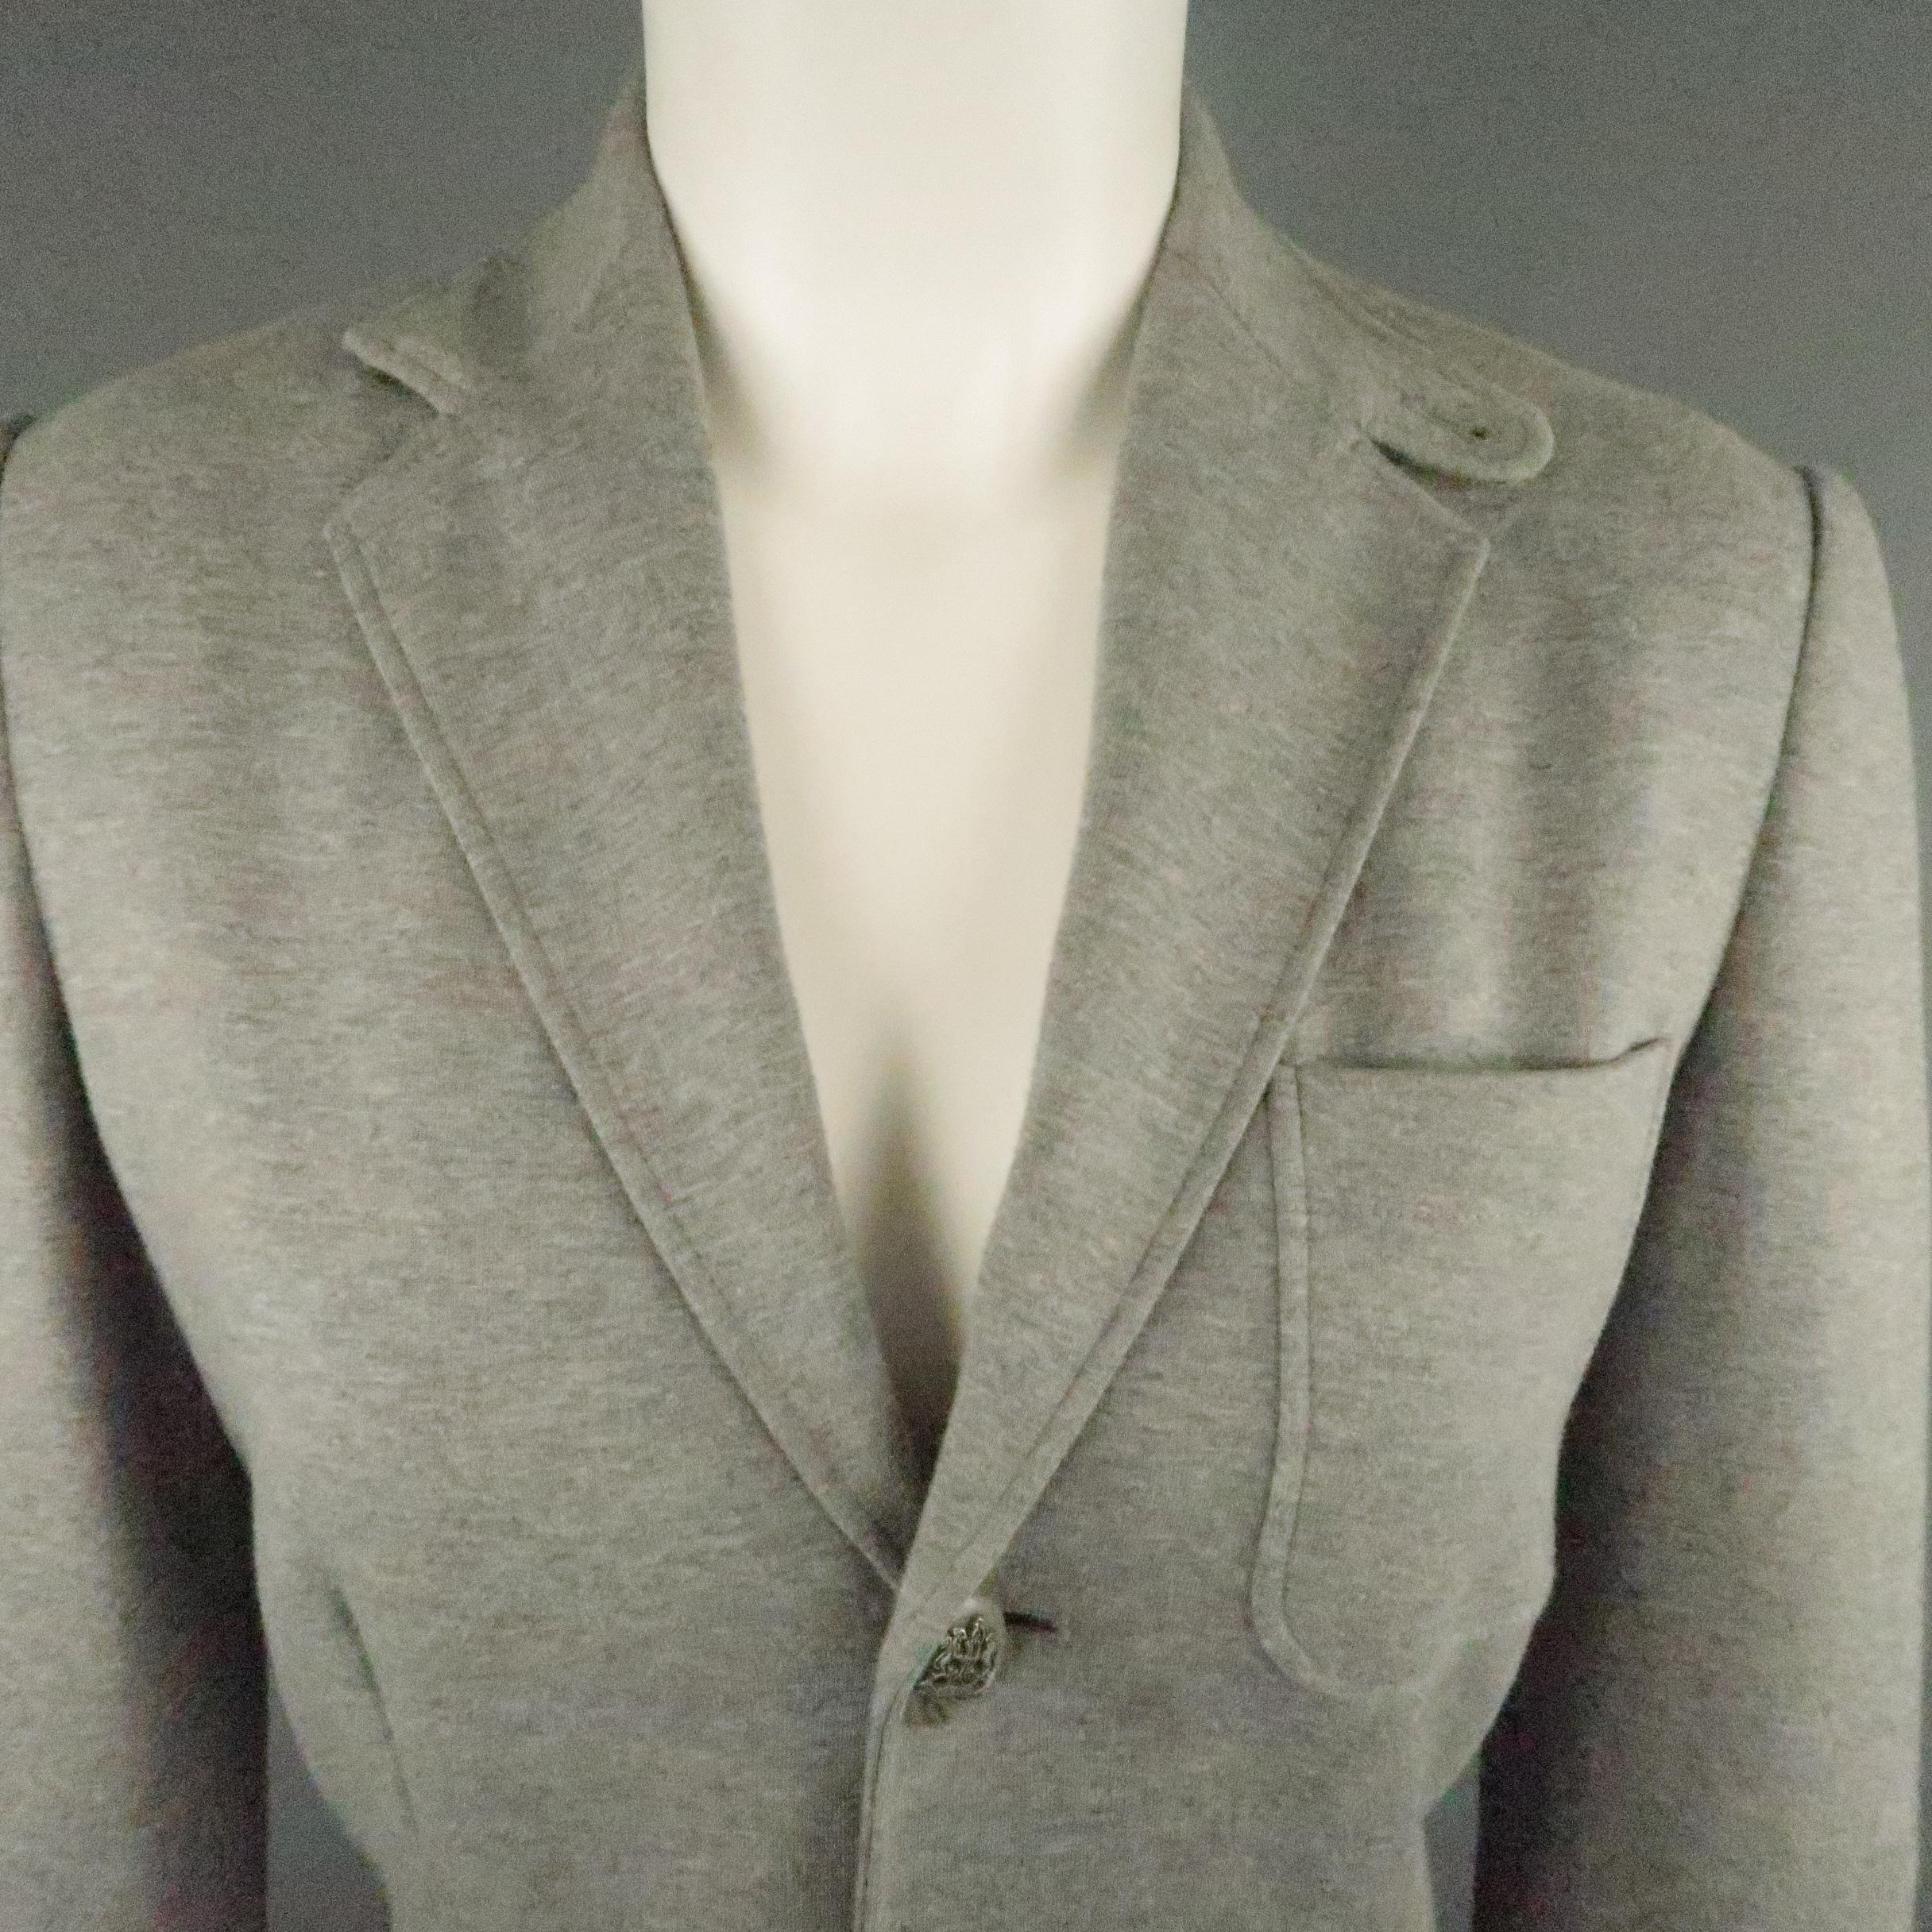 Black Label by RALPH LAUREN equestrian style blazer jacket comes in heather gray cotton blend jersey with a tab collar notch lapel, patch pockets, single breasted three button front with crest buttons, and functional button cuffs.
 
Excellent